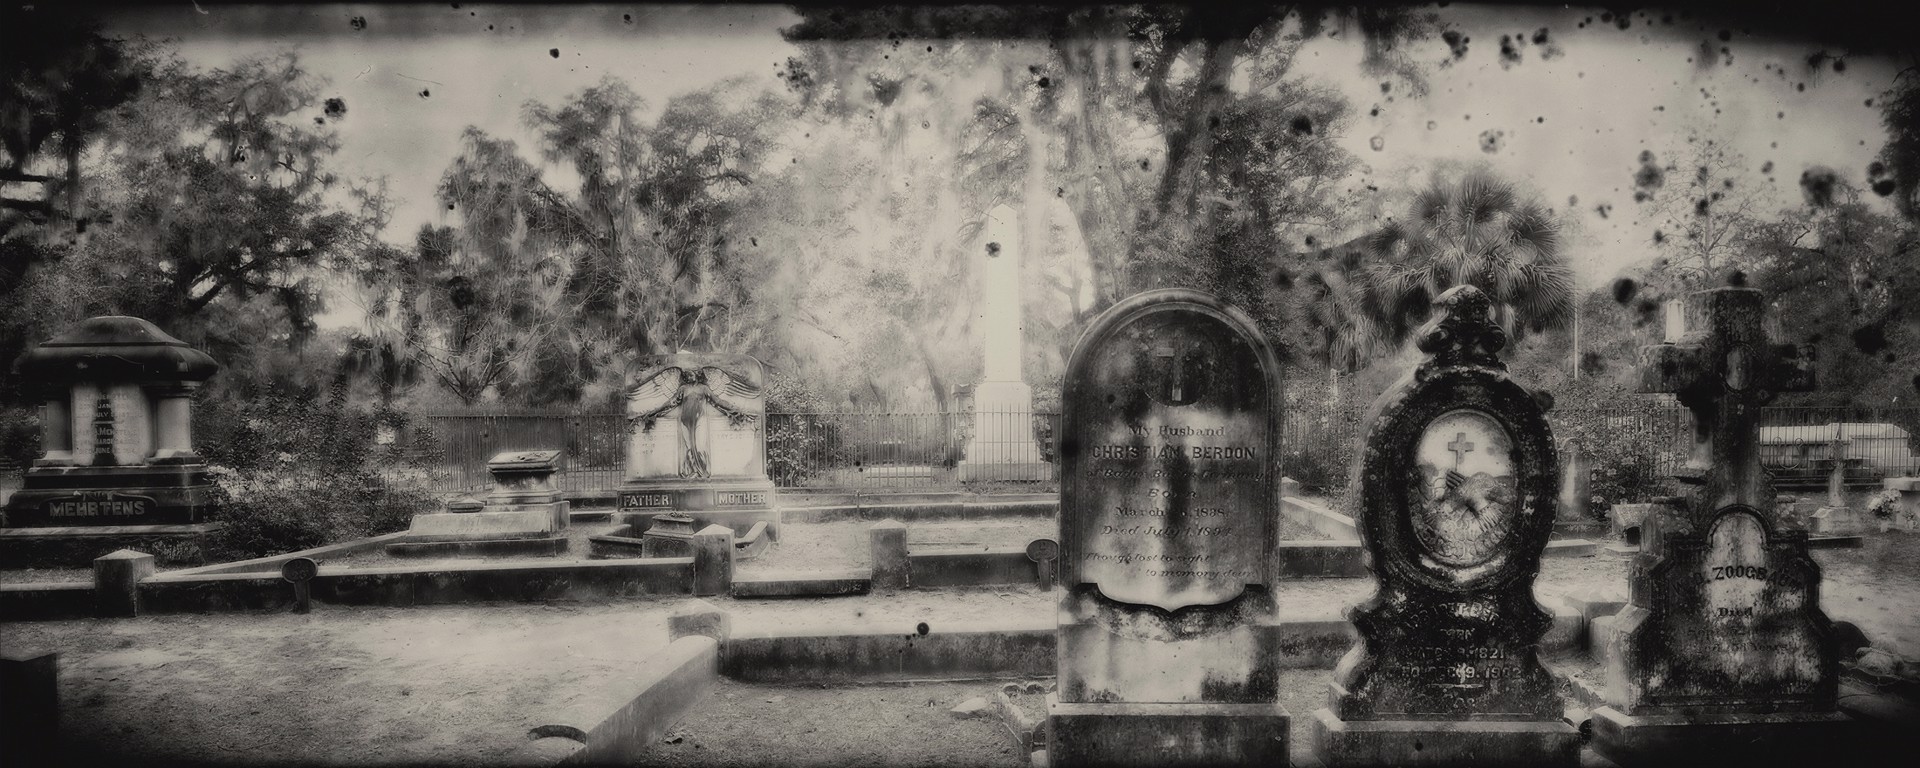 A Study of the Fragility of Life #2, Bonaventure Cemetery by Richard Austin